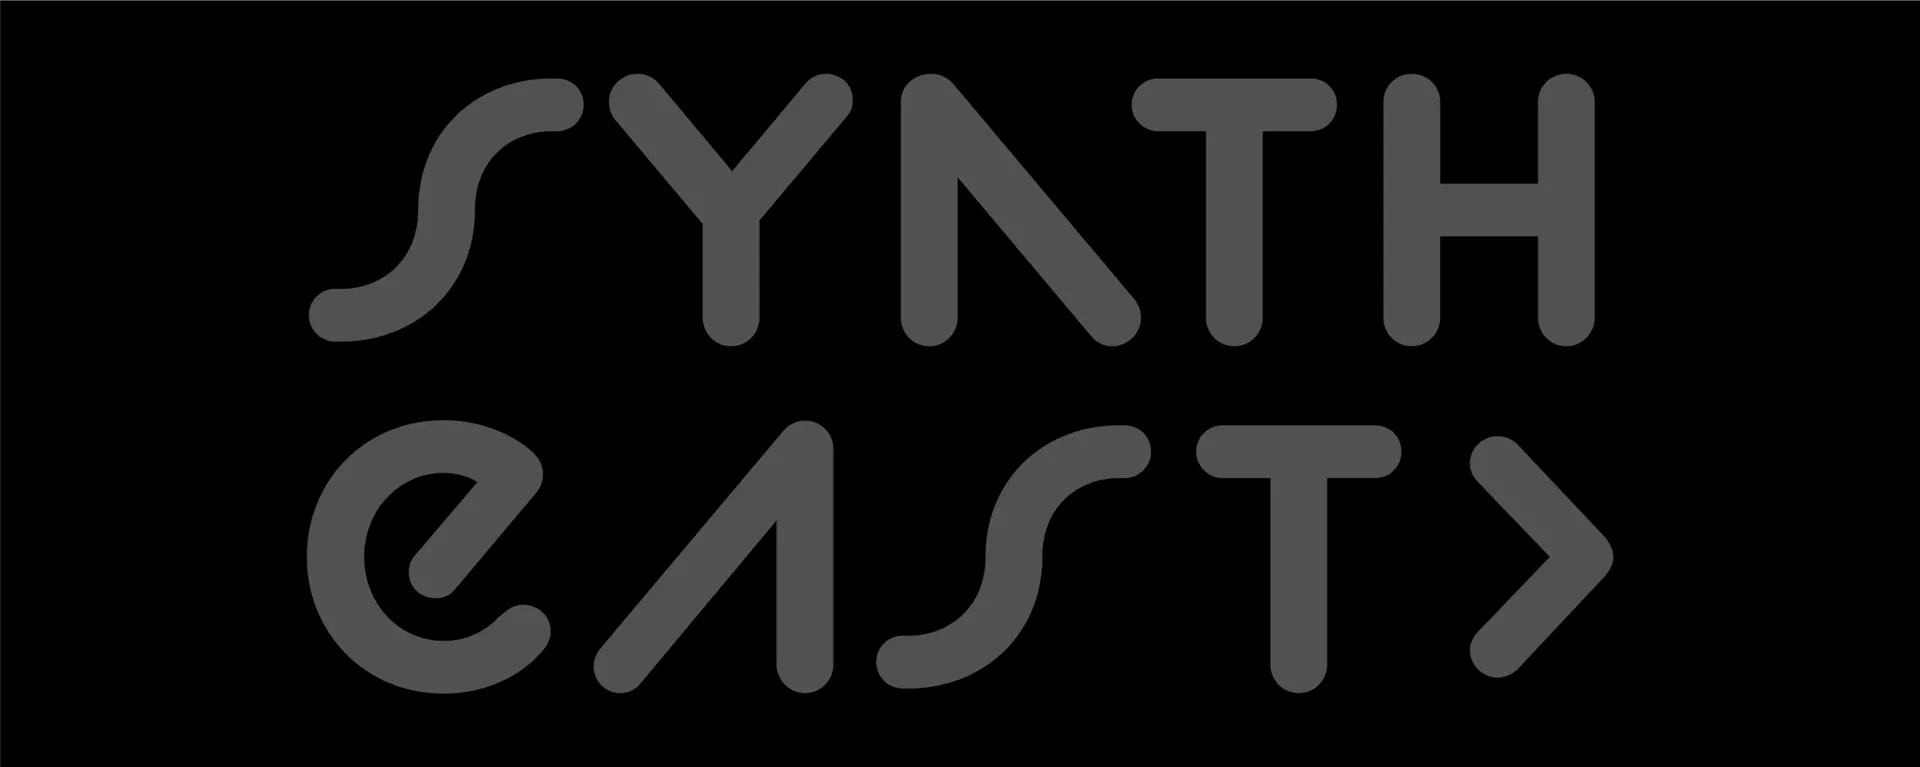 Synth East, the expo by Molten Modular and Electronic Sound Magazine